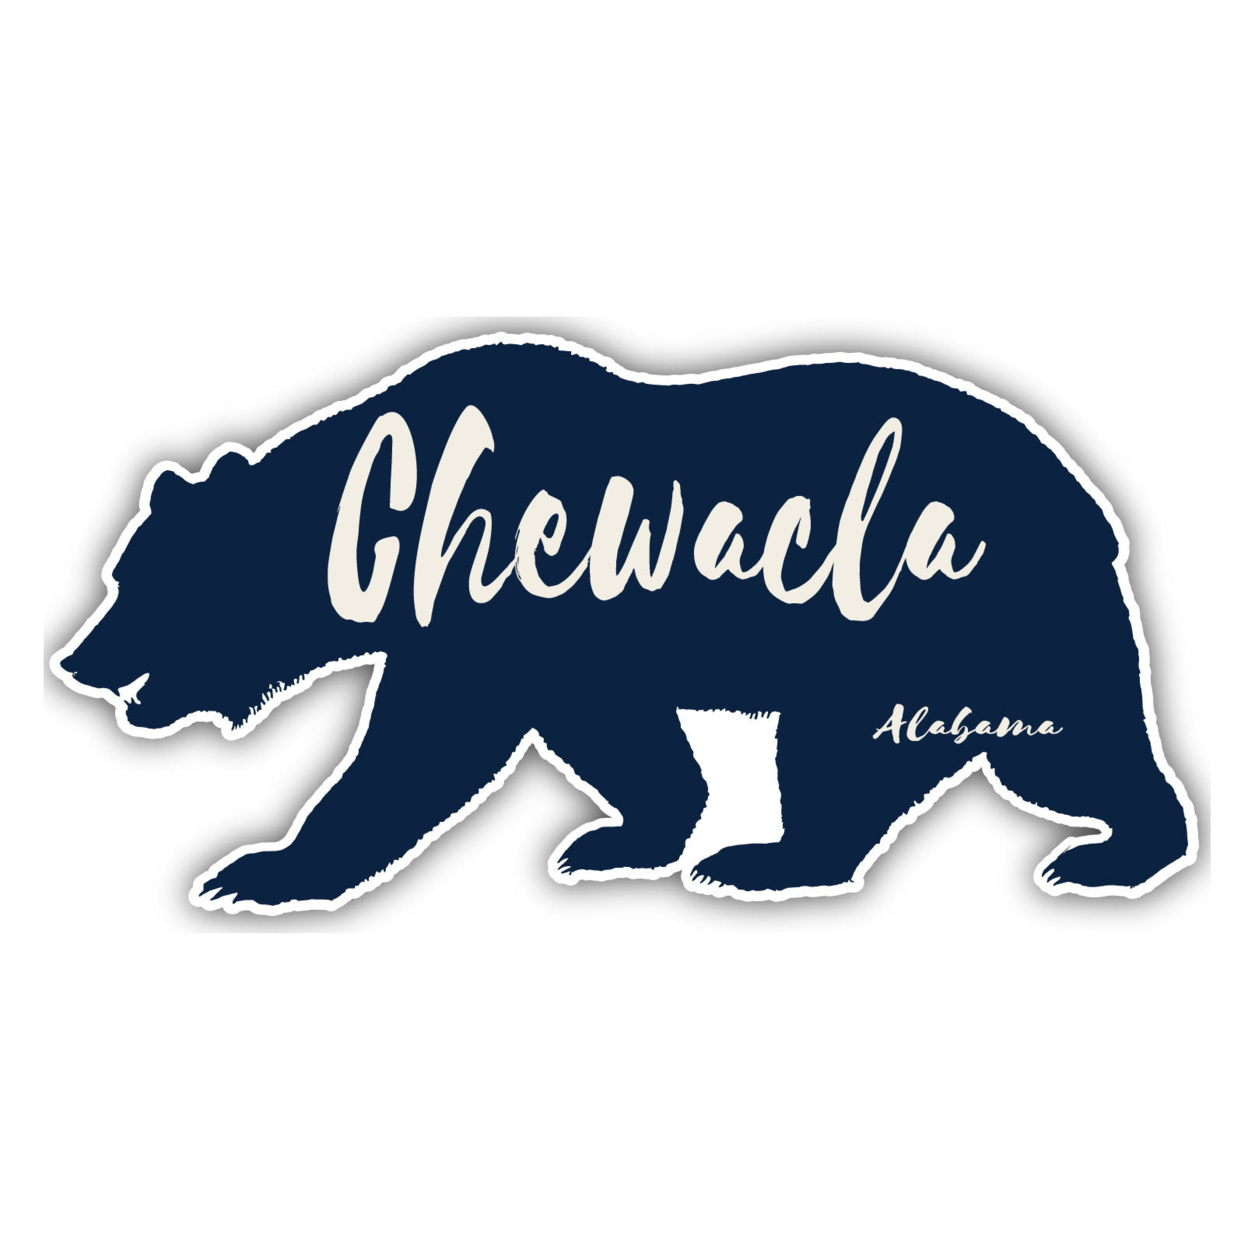 Chewacla Alabama Souvenir Decorative Stickers (Choose Theme And Size) - 4-Pack, 2-Inch, Bear